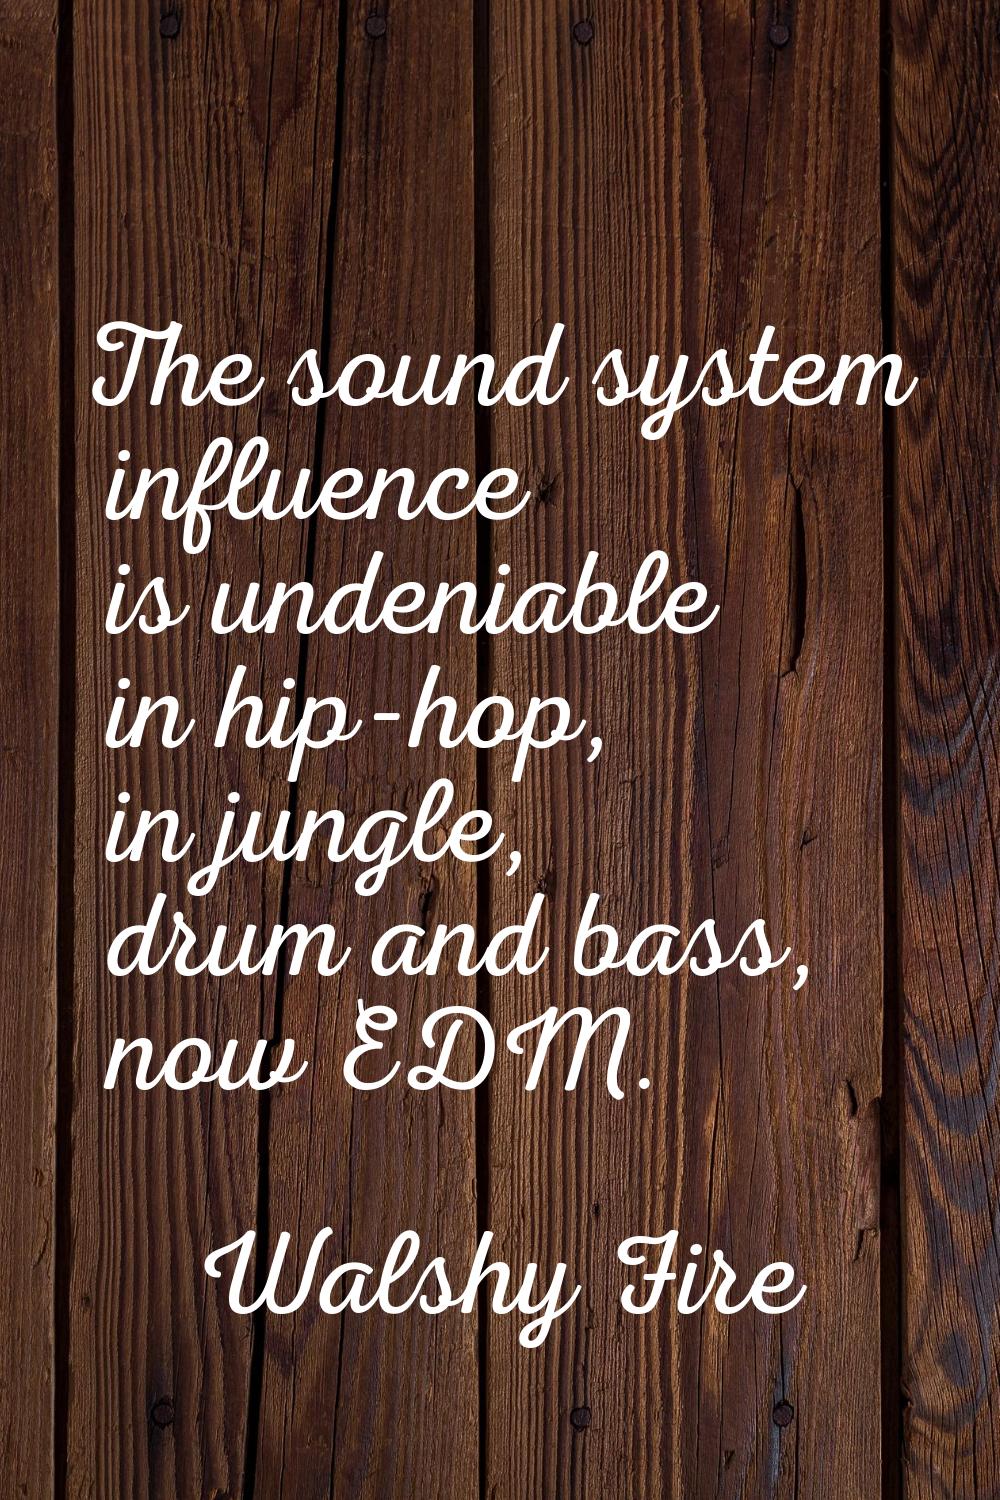 The sound system influence is undeniable in hip-hop, in jungle, drum and bass, now EDM.